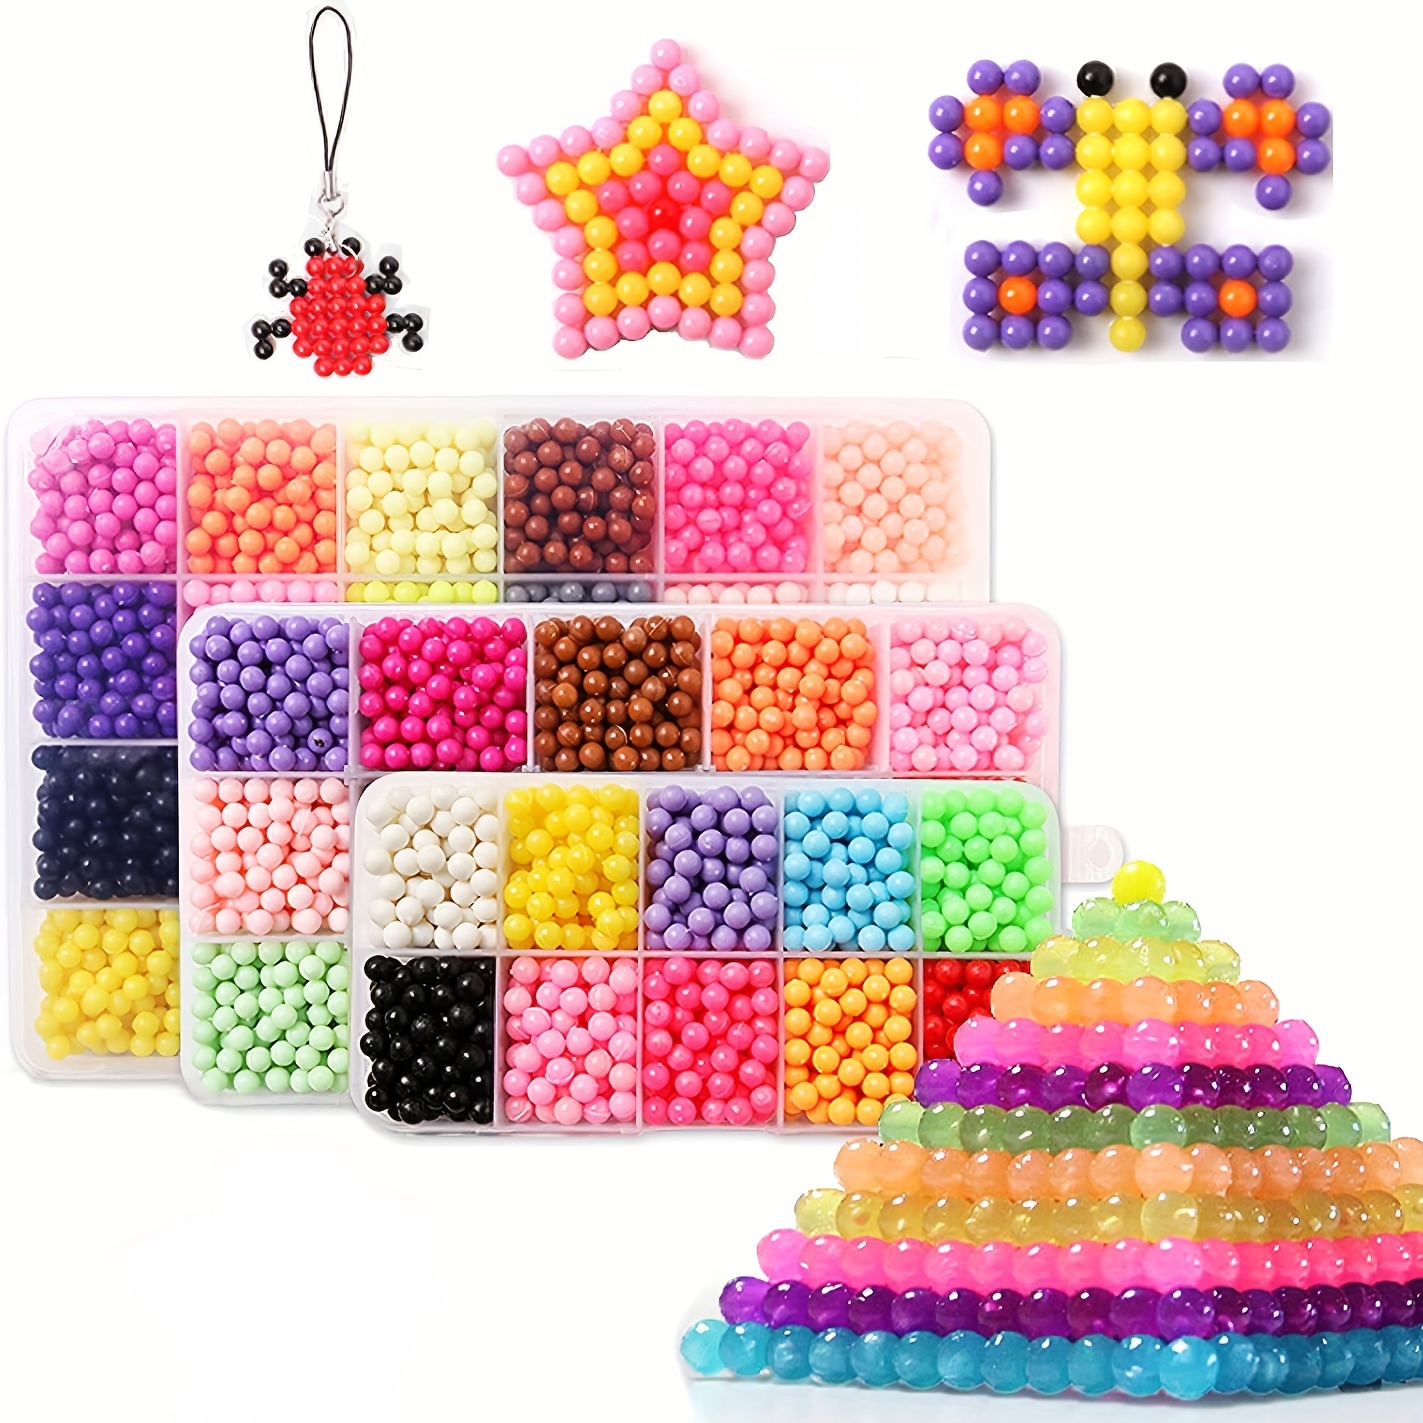 Buy Water Fuse Beads Kit 30 Colors 3600 Beads, Creative Beads Toy